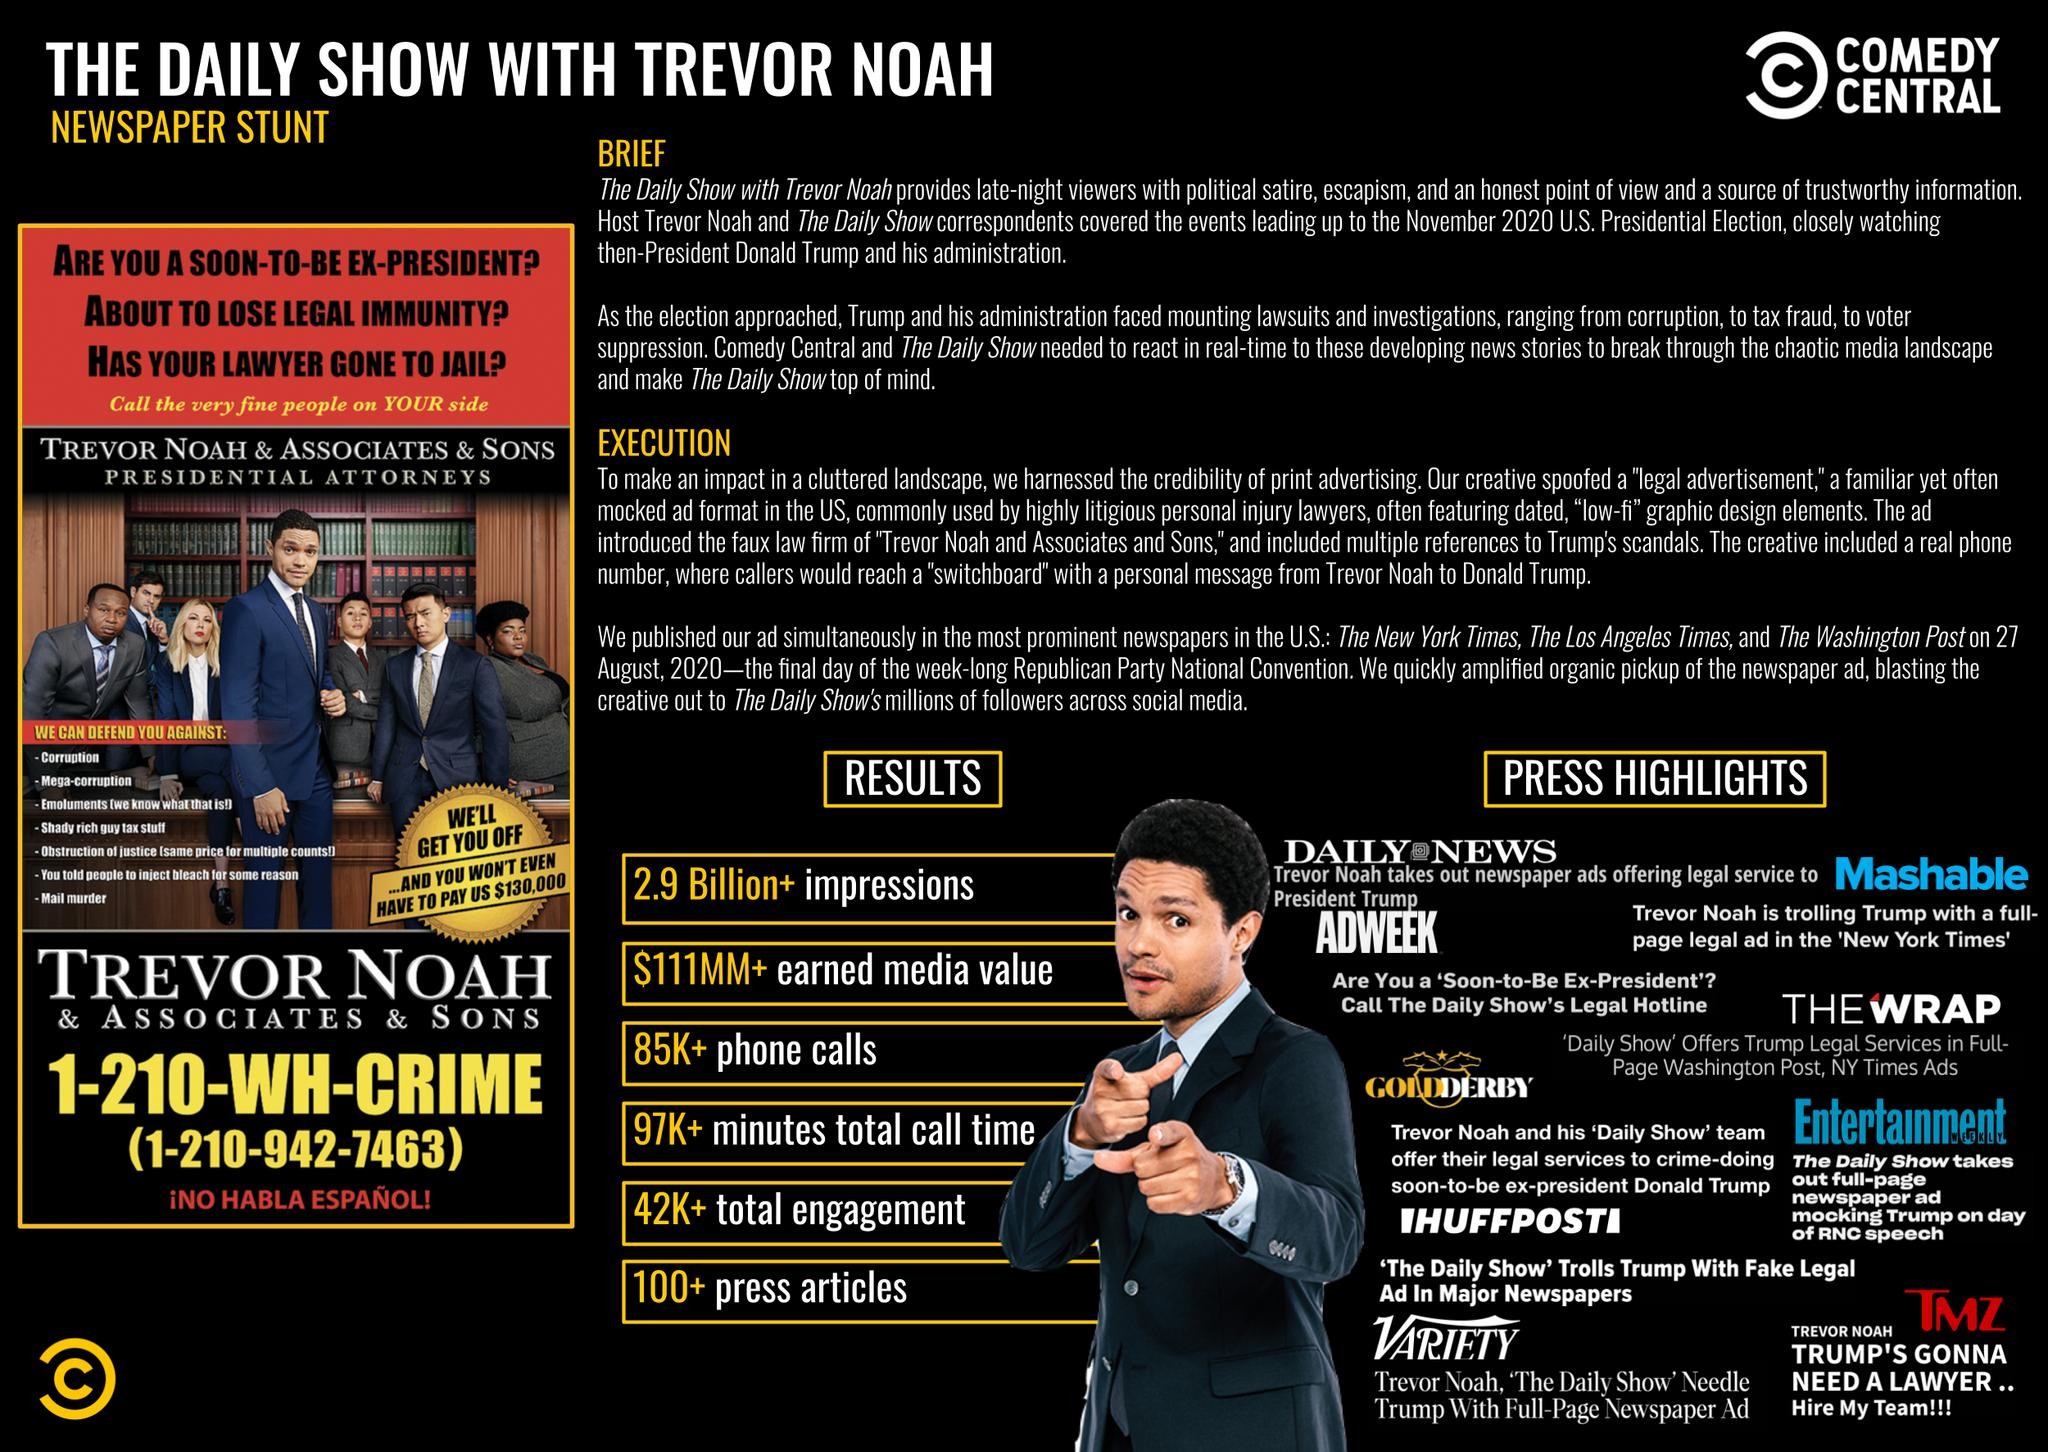 THE DAILY SHOW WITH TREVOR NOAH FULL PAGE NEWSPAPER AD